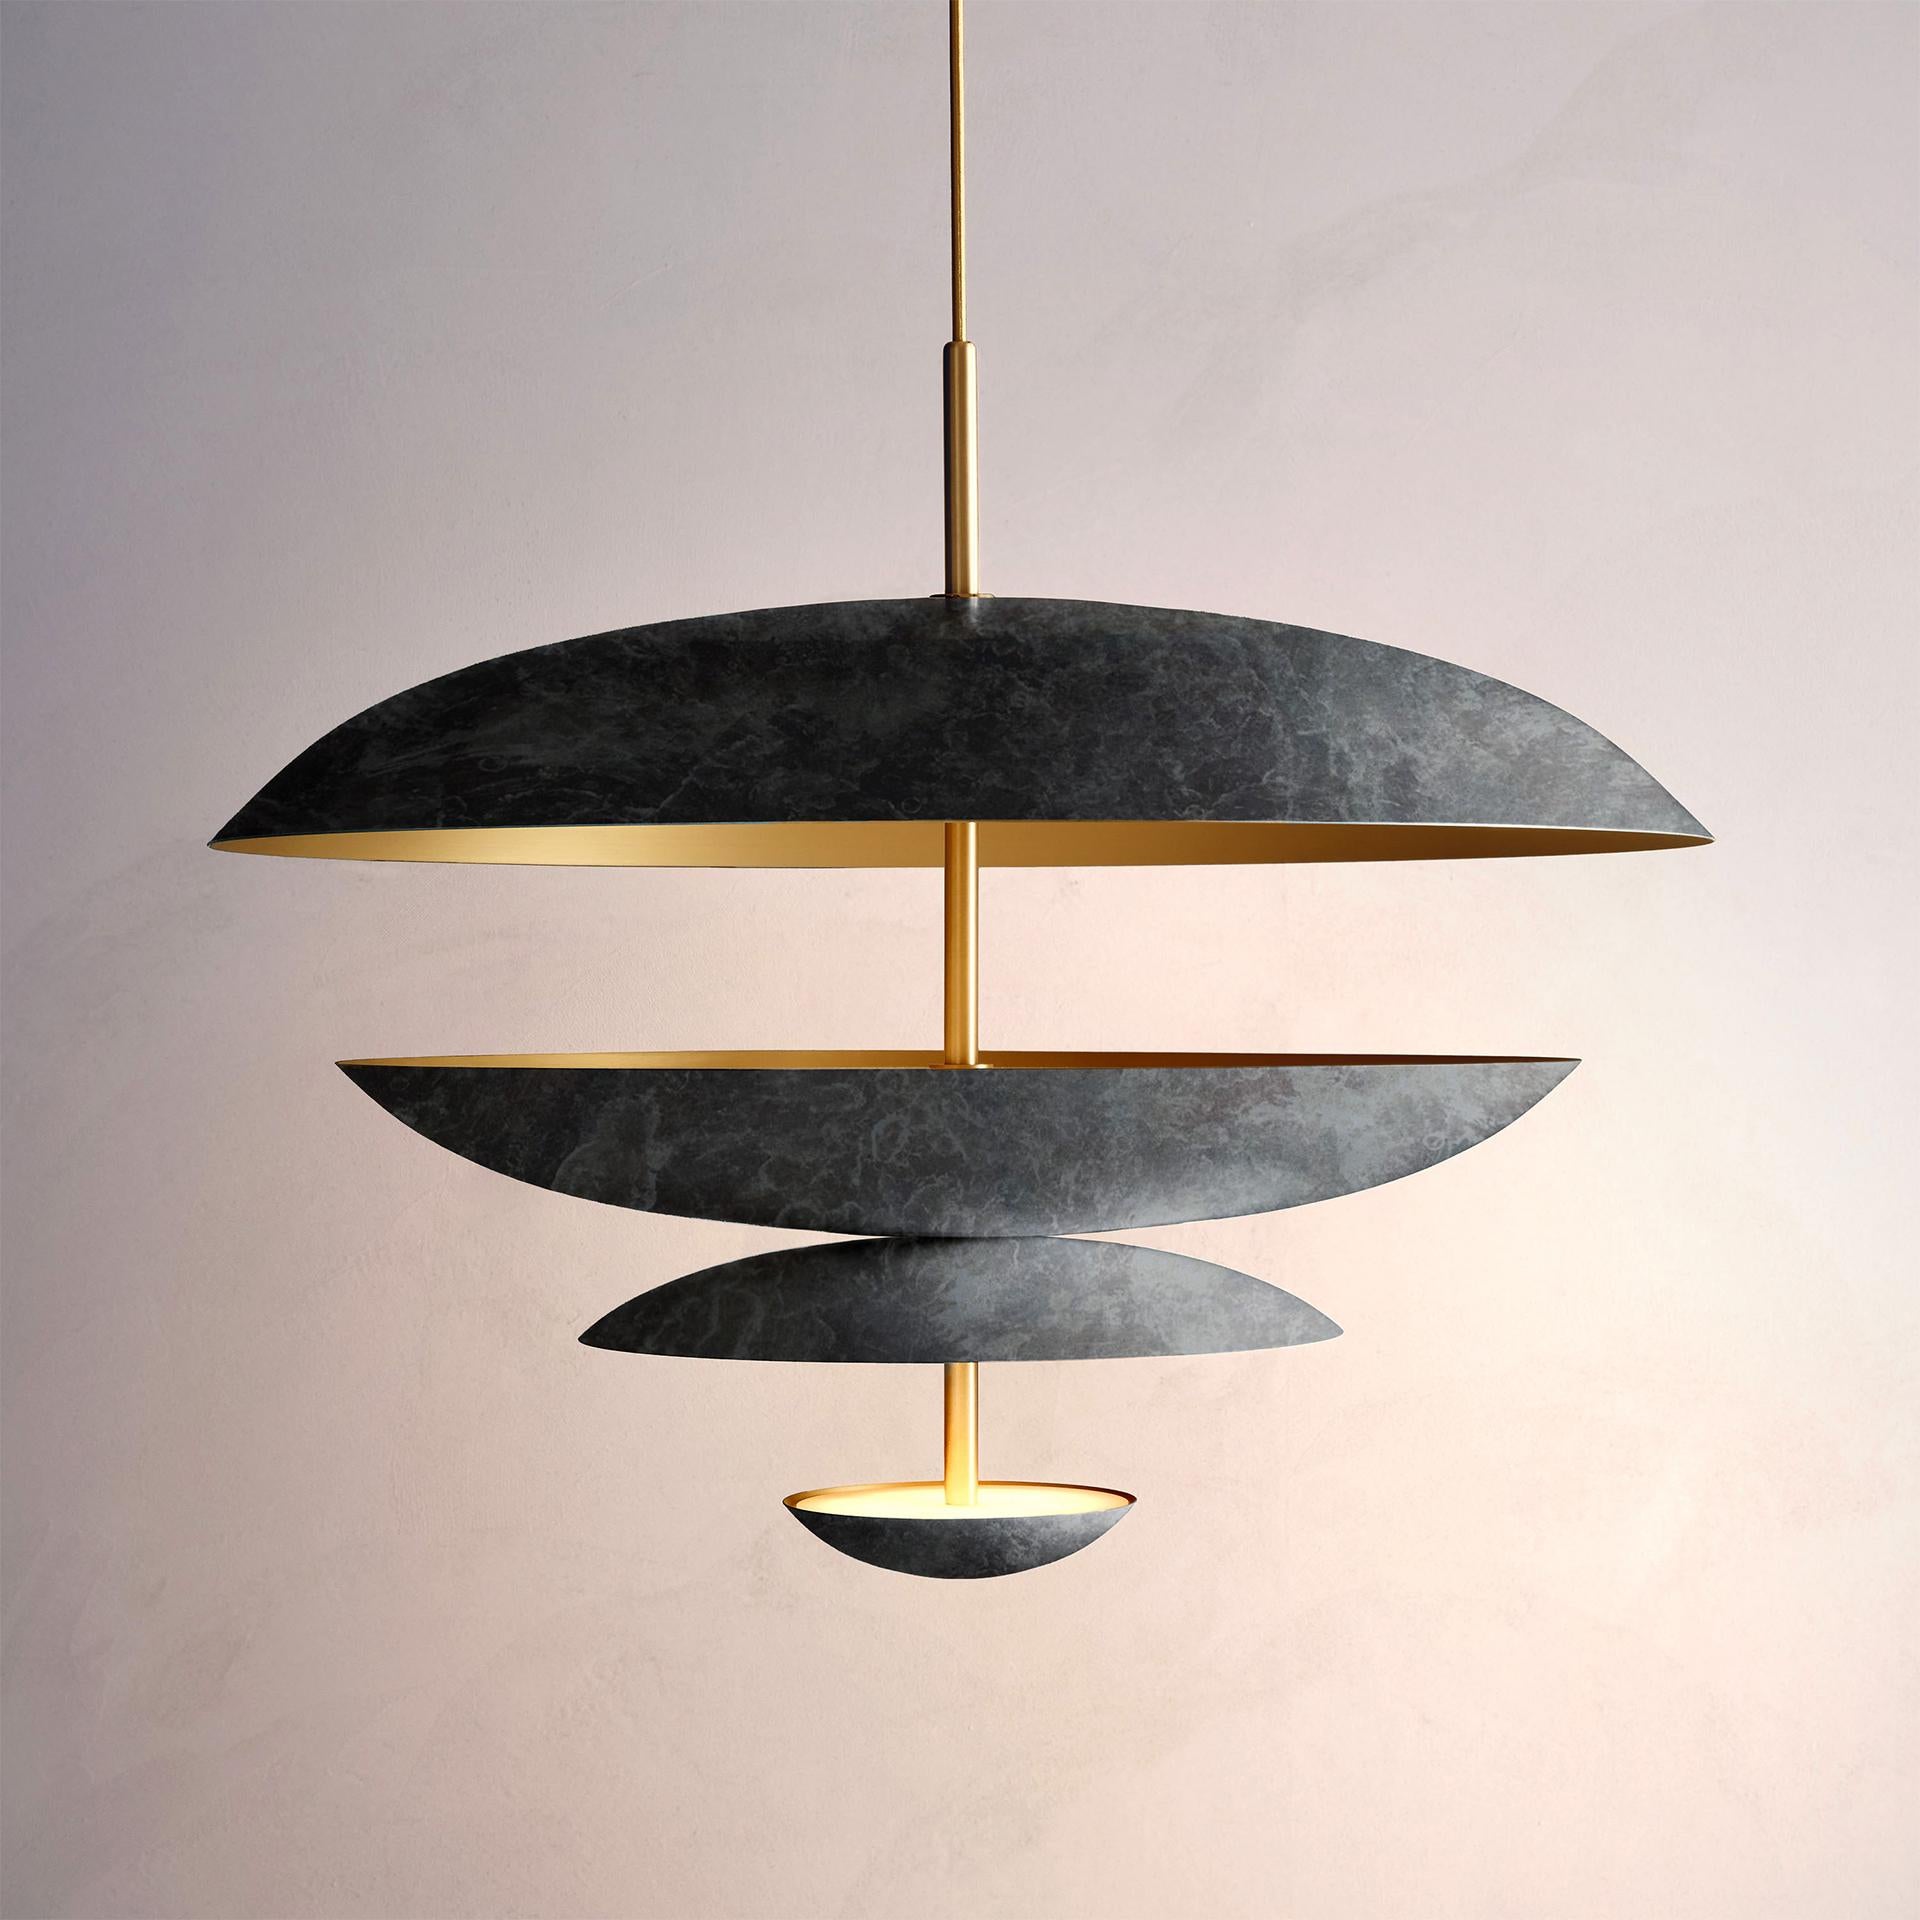 Composed by four finely hand-spun brass plates, this chandelier is finished in a callisto patina on one side and satin brushed brass on the other to reveal the bright texture of brass. Light is projected into the shade before reflecting out,